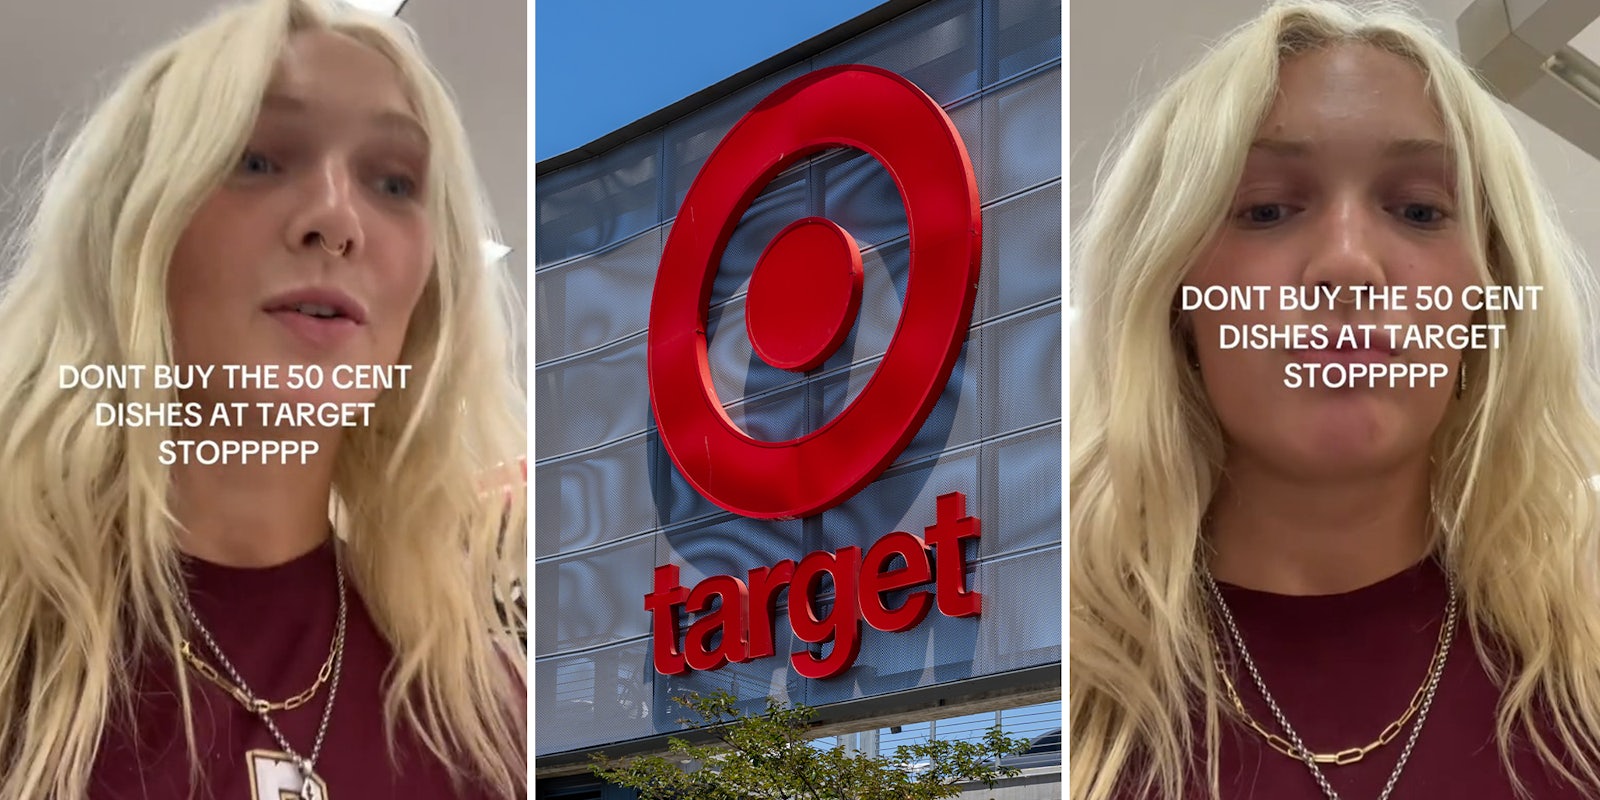 Woman warns against the 50-cent dishes you can get at Target